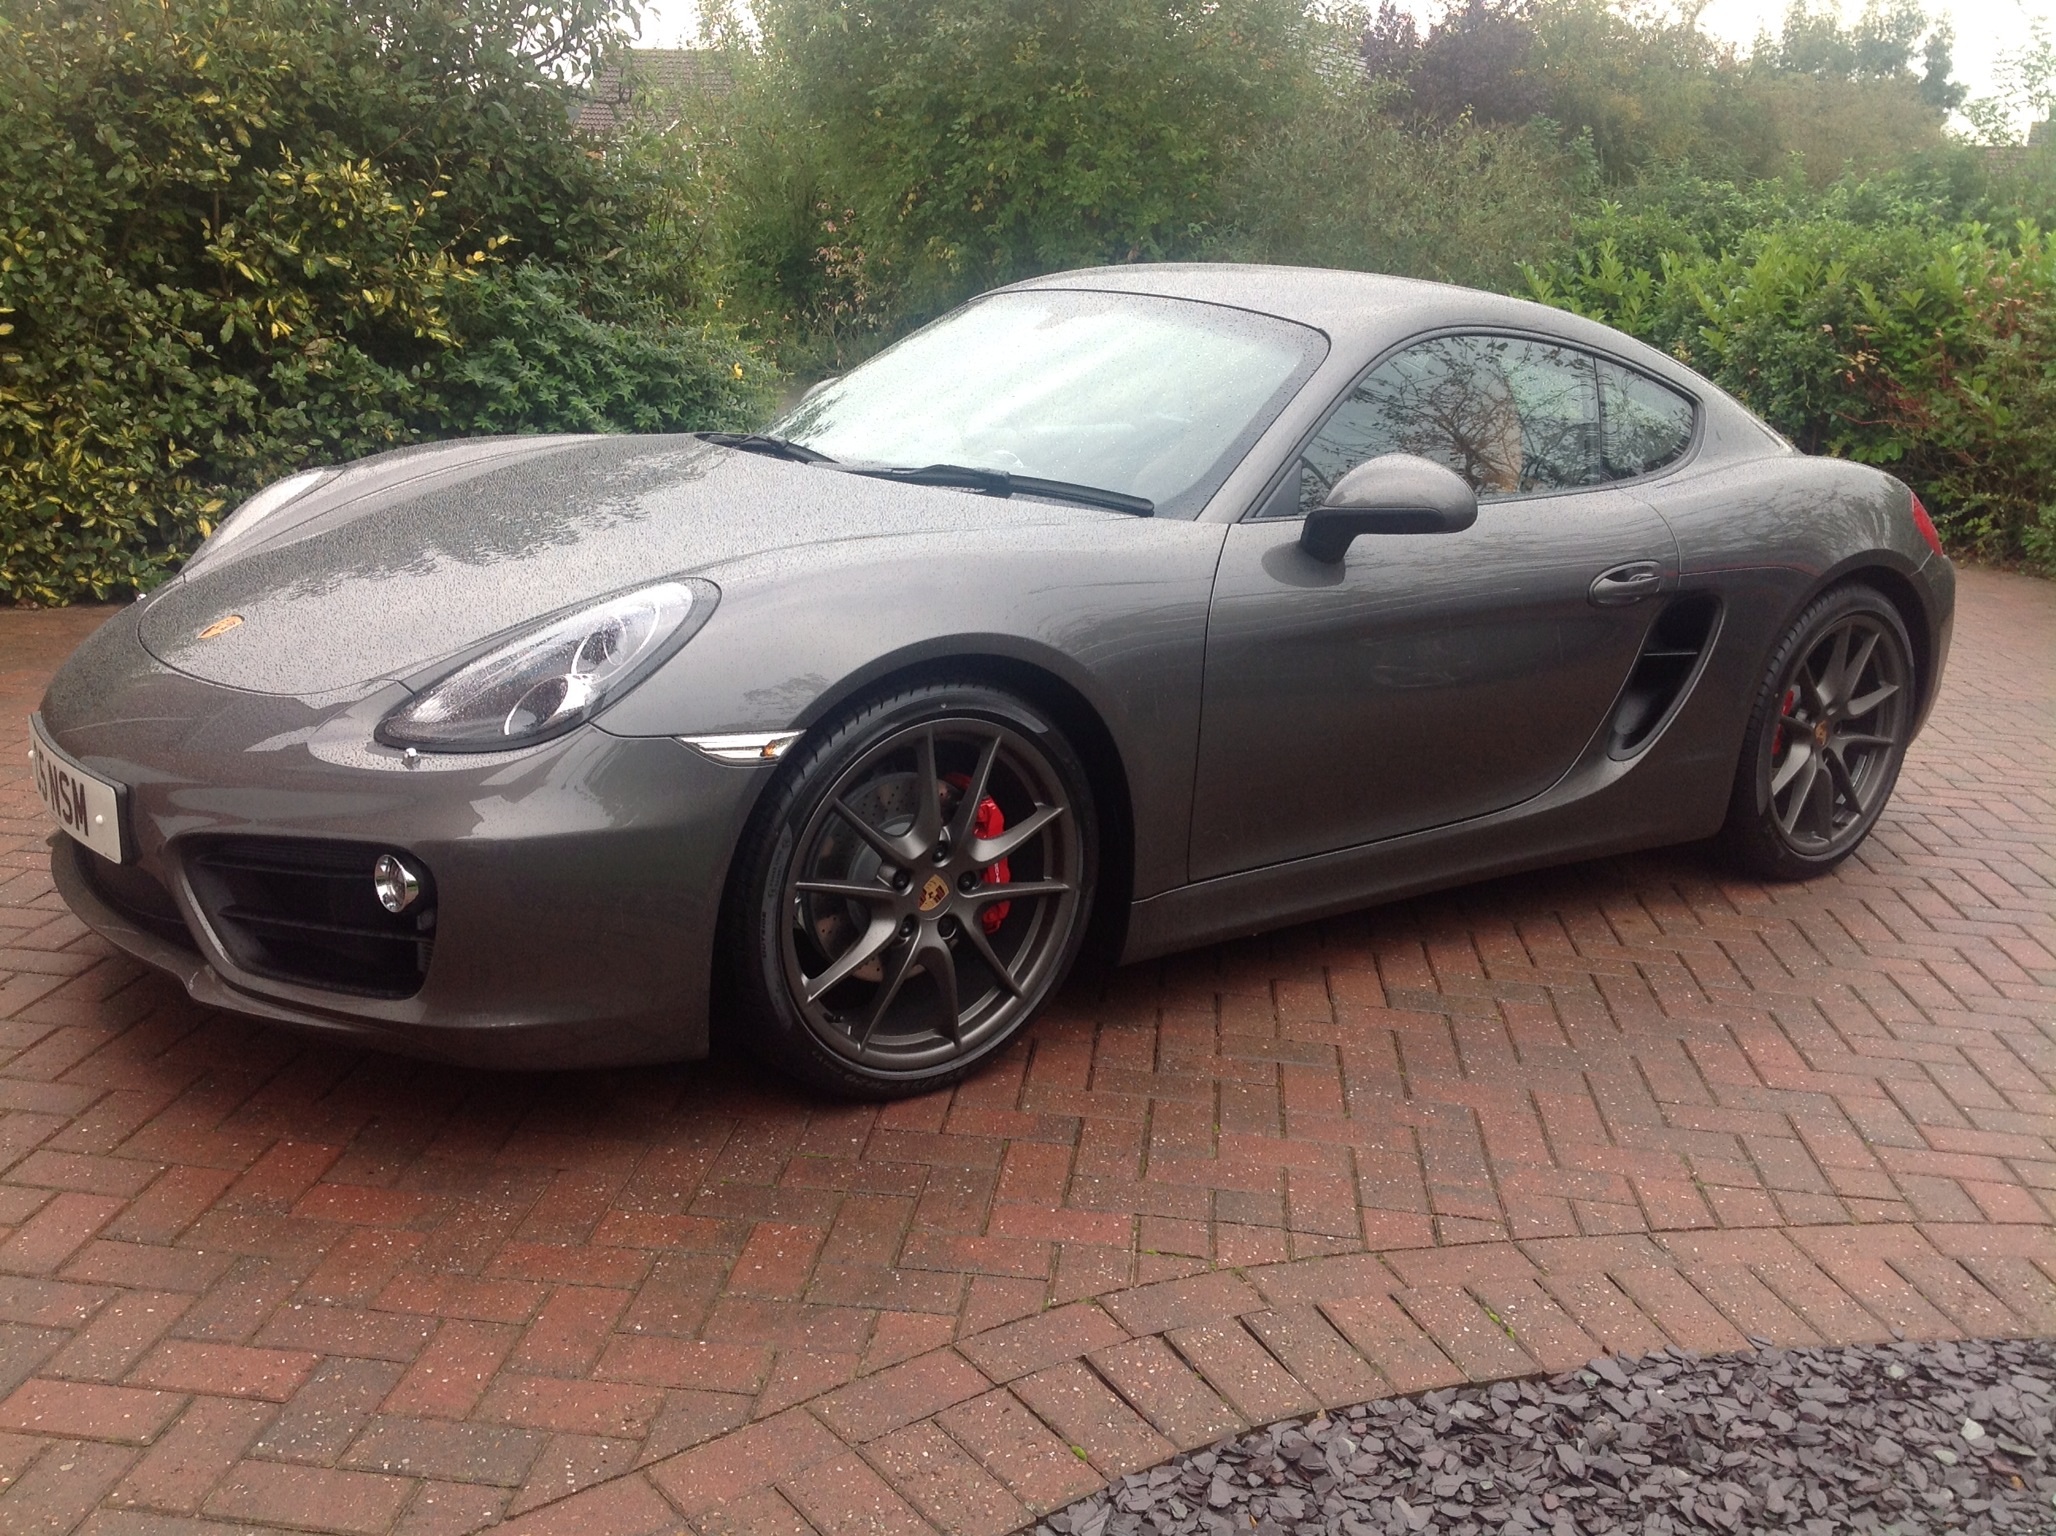 Boxster & Cayman Picture Thread - Page 8 - Boxster/Cayman - PistonHeads